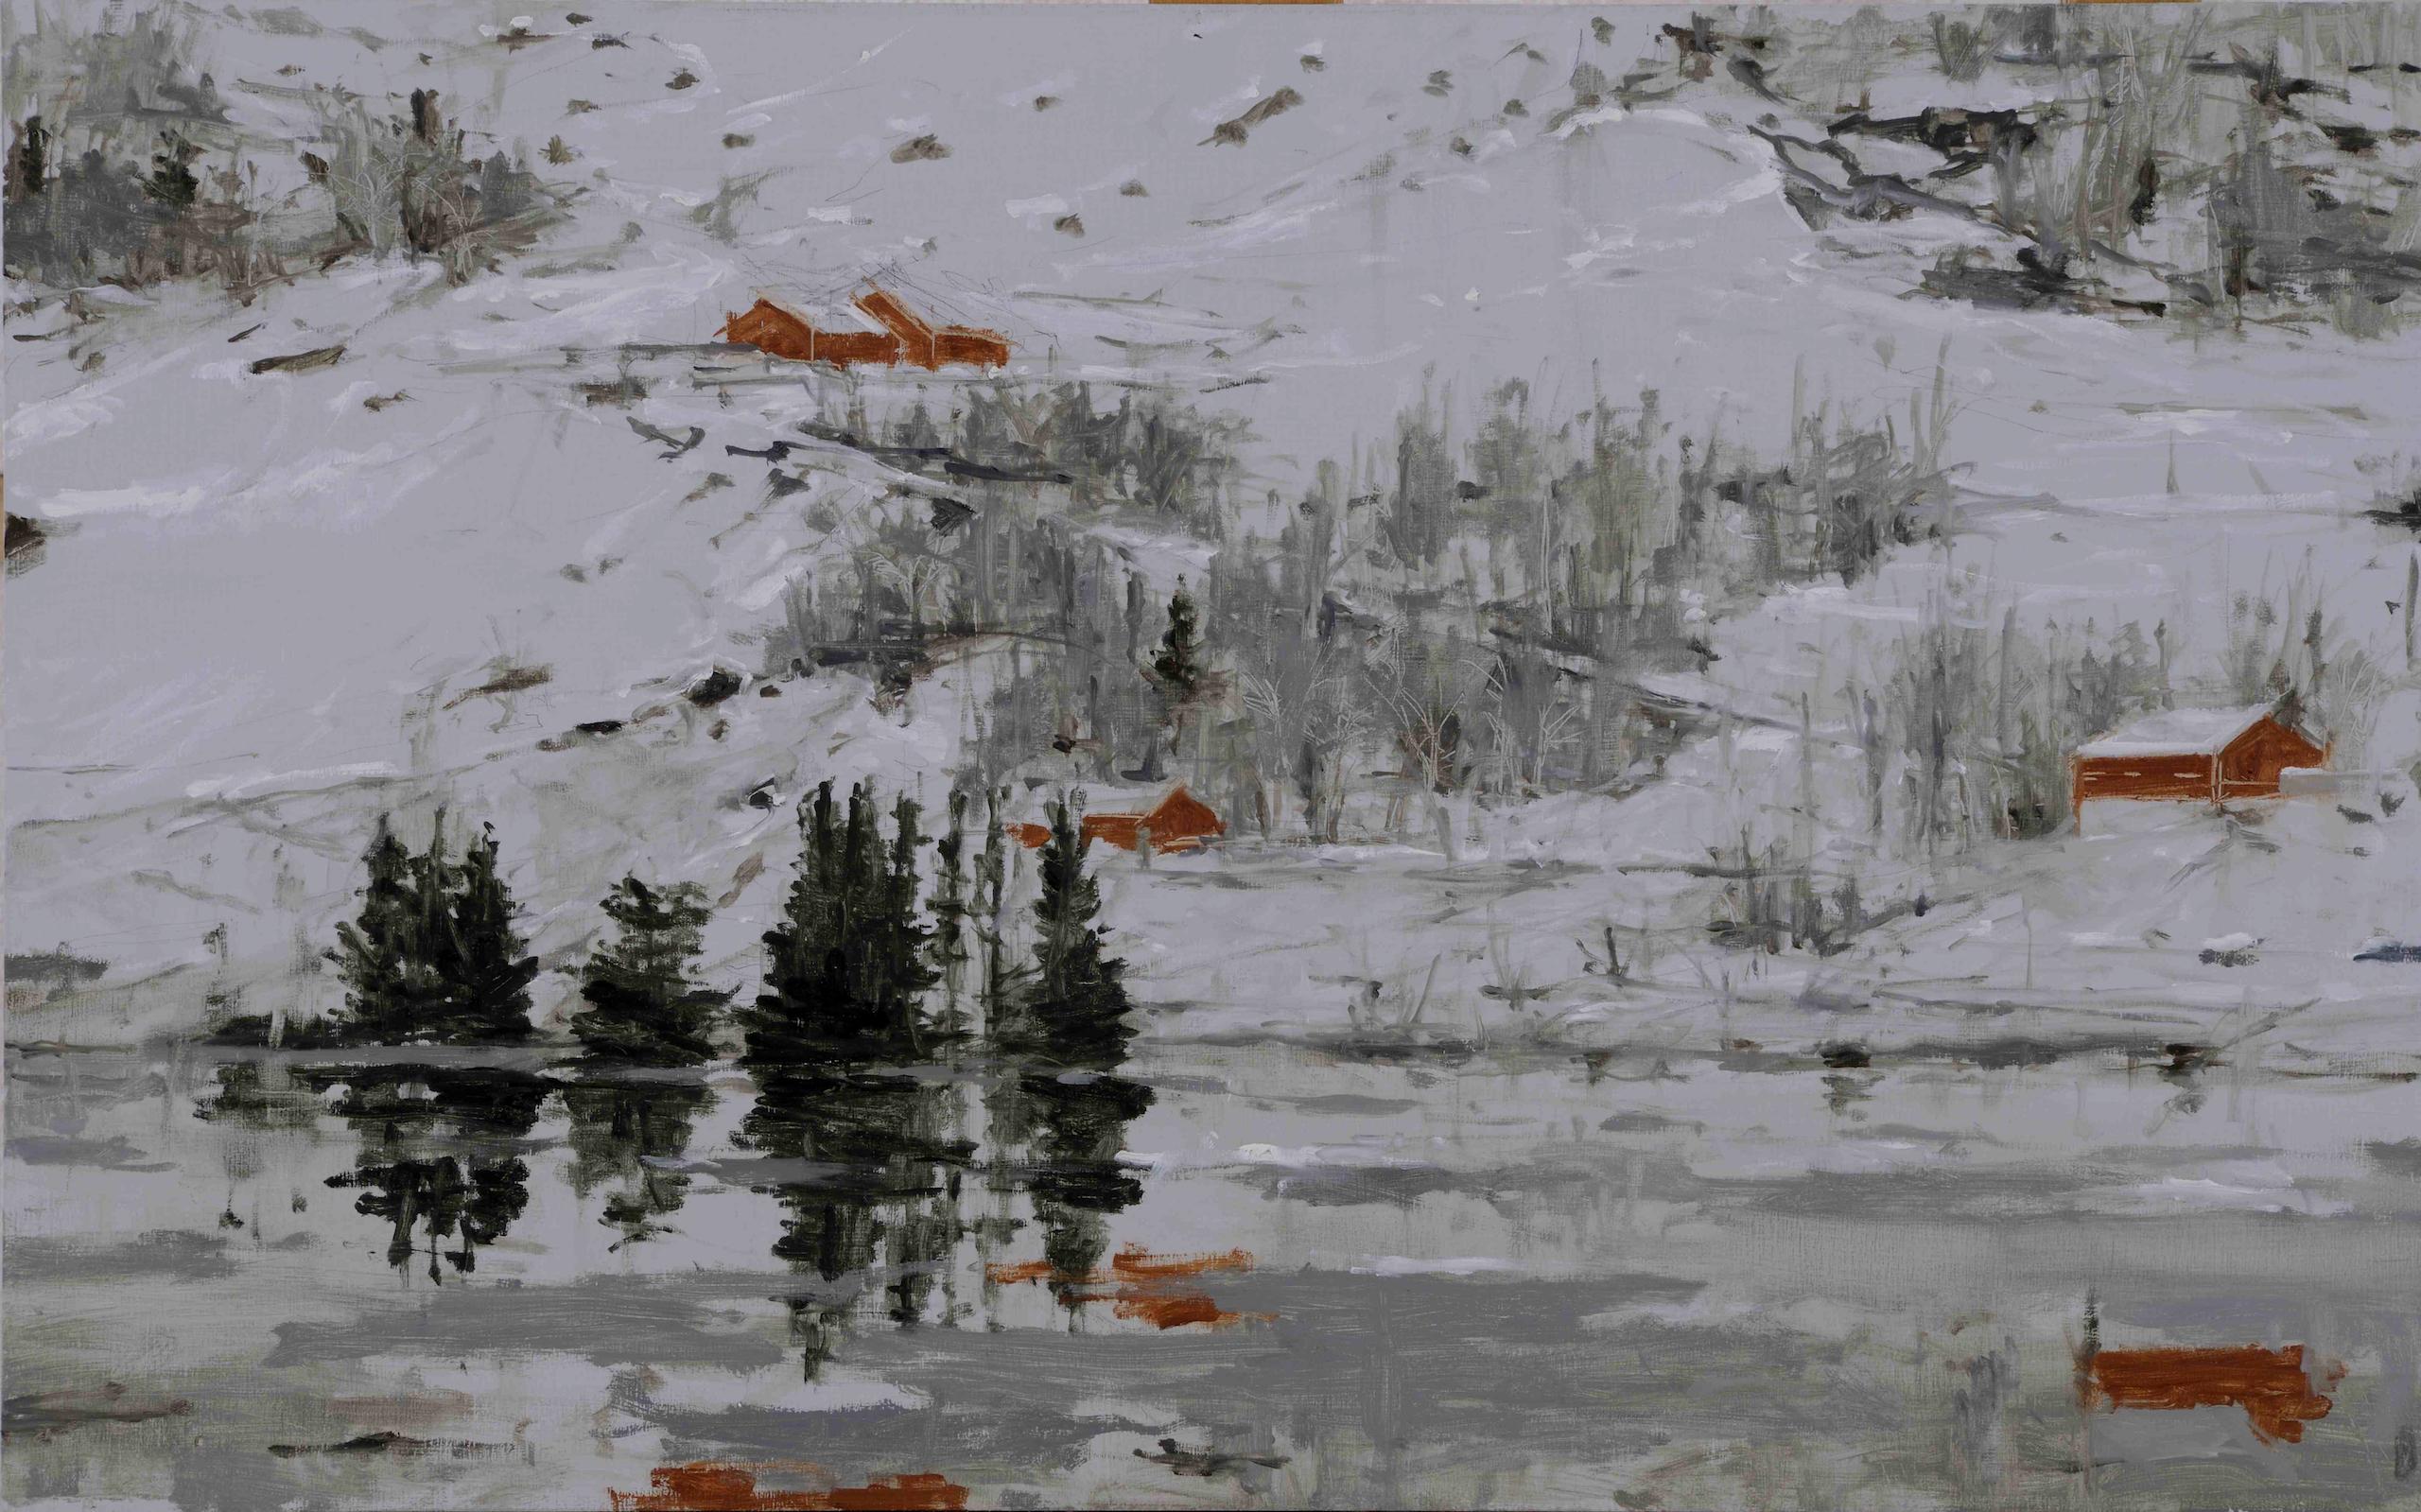 Narvik No. 4 is a unique oil on wood painting by Spanish contemporary artist Calo Carratalá, dimensions are 46 × 74 cm (18.1 × 29.1 in). 
The artwork is signed and comes with a certificate of authenticity.

This piece depicts a wintry scene typical